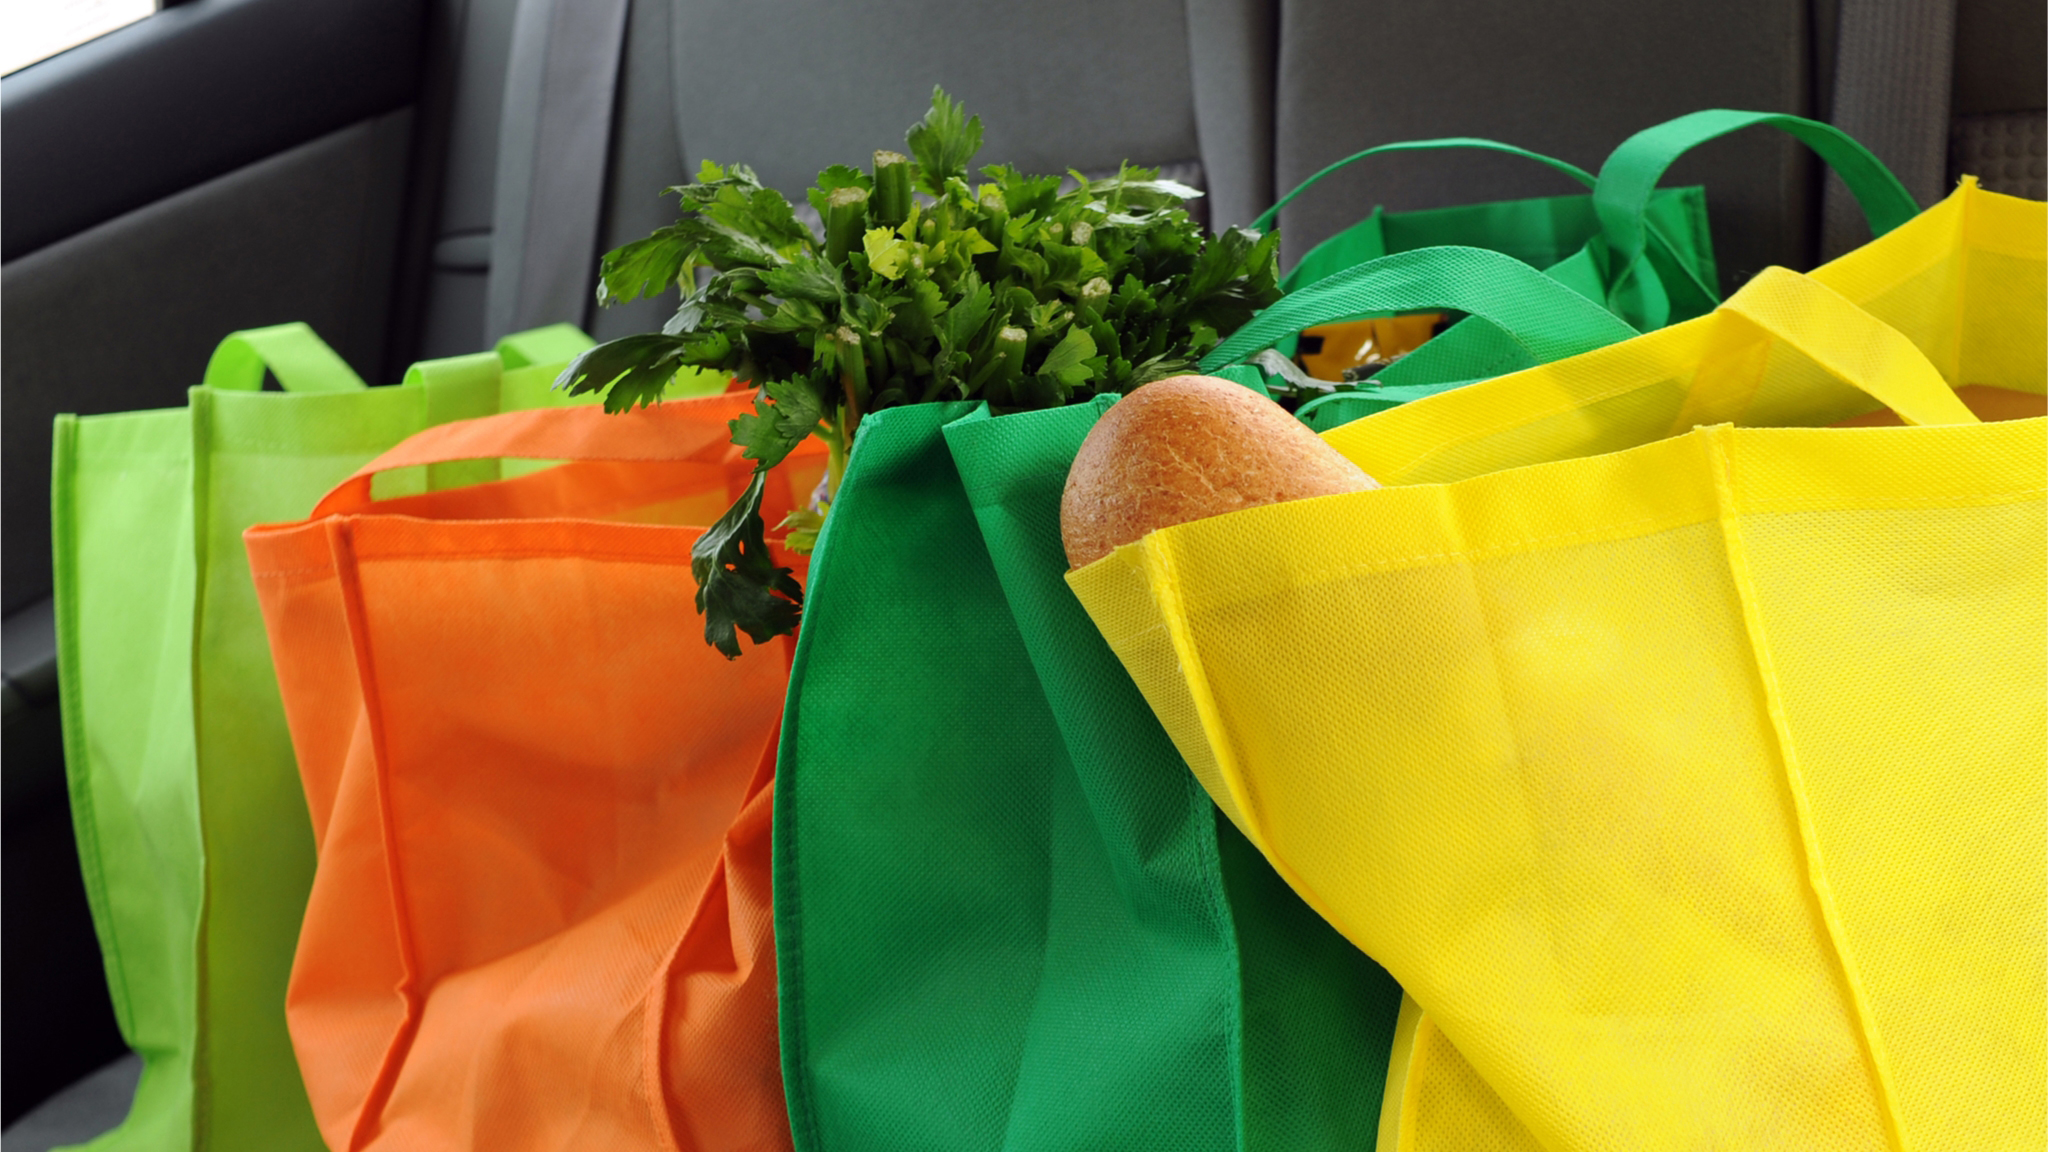 Coronavirus: Is it Safe to Use Reusable Shopping Bags?